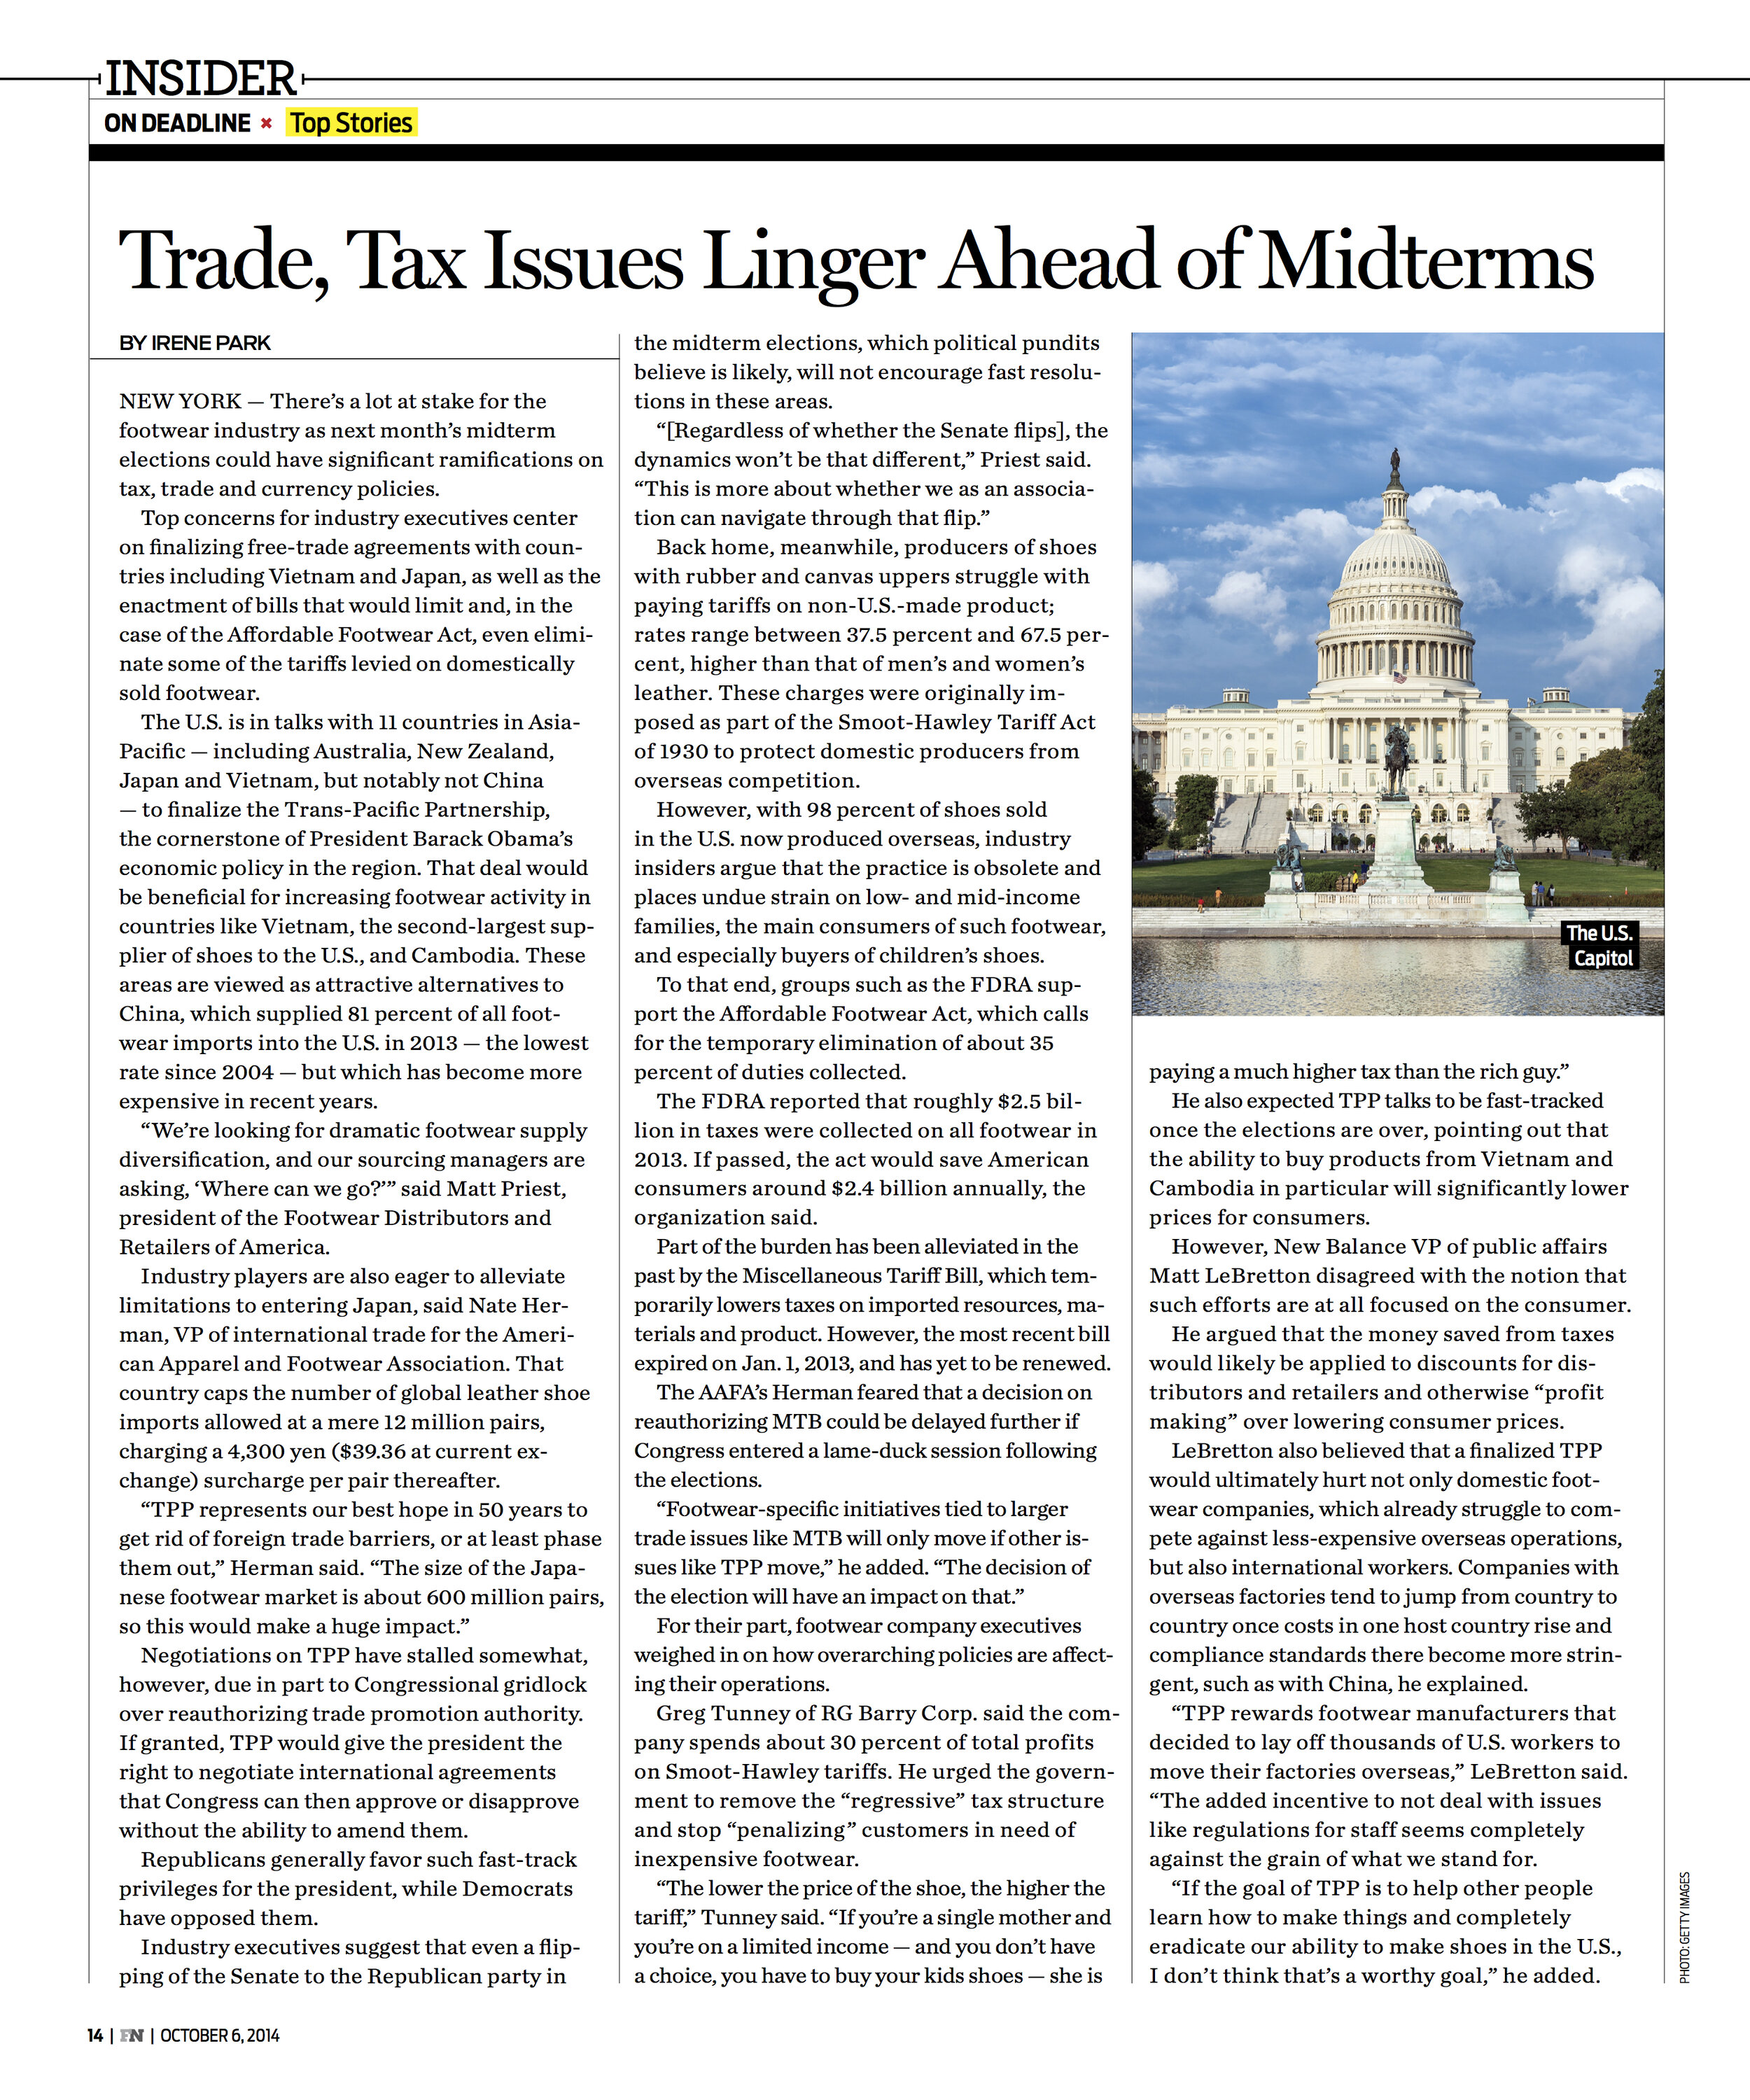 Trade, Tax Issues Linger Ahead of Midterms